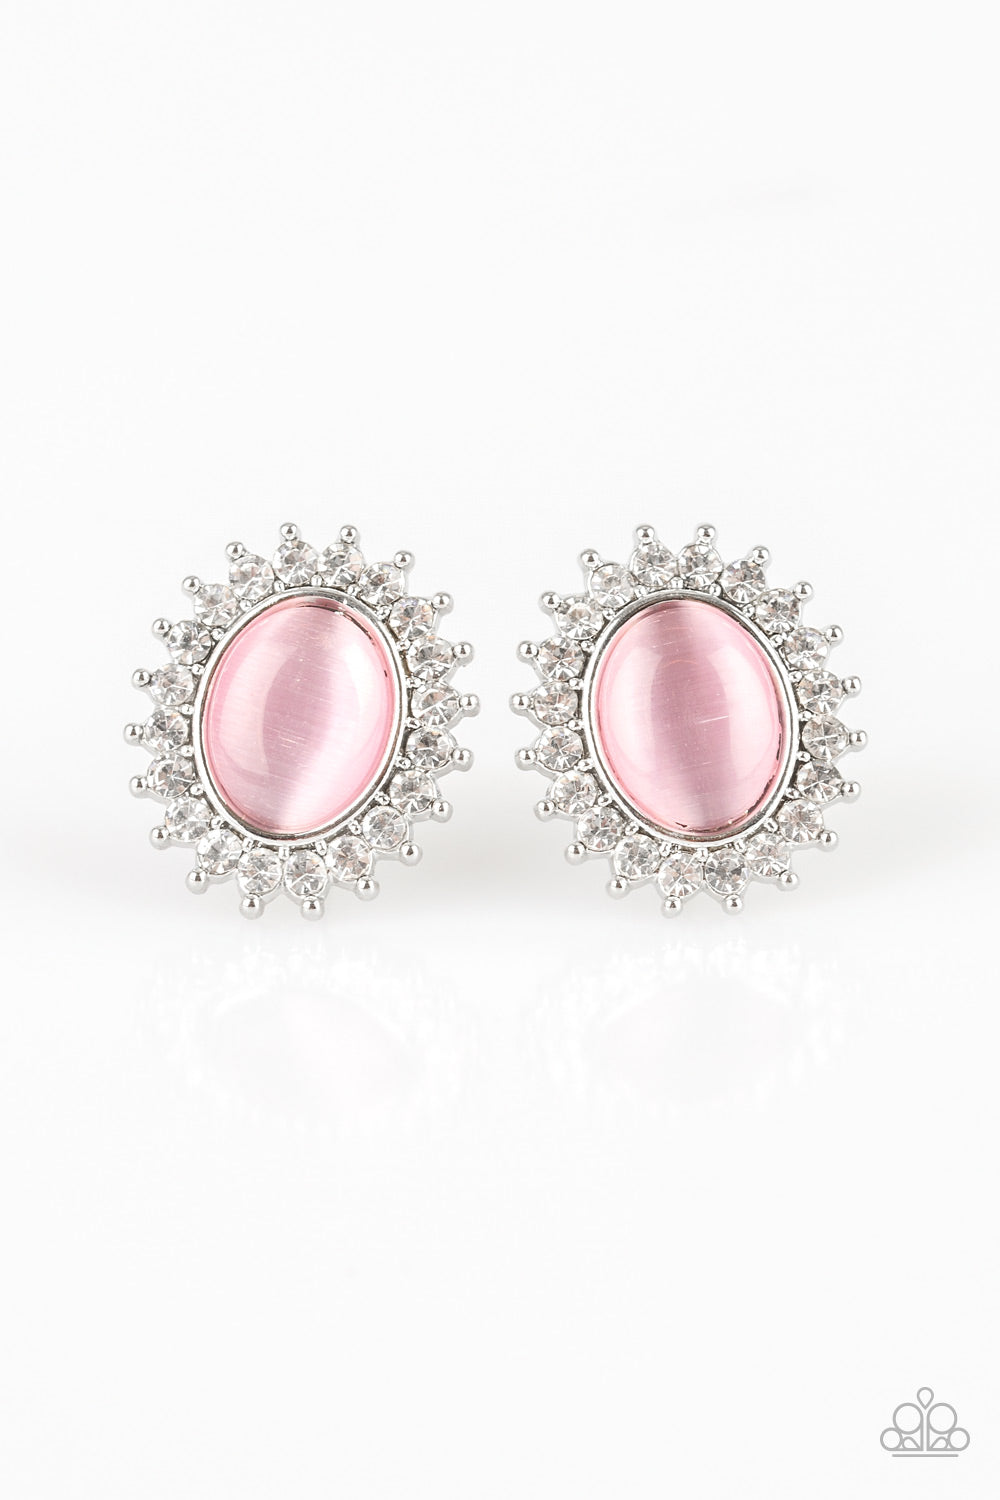 Hey There, Gorgeous - Pink Earrings